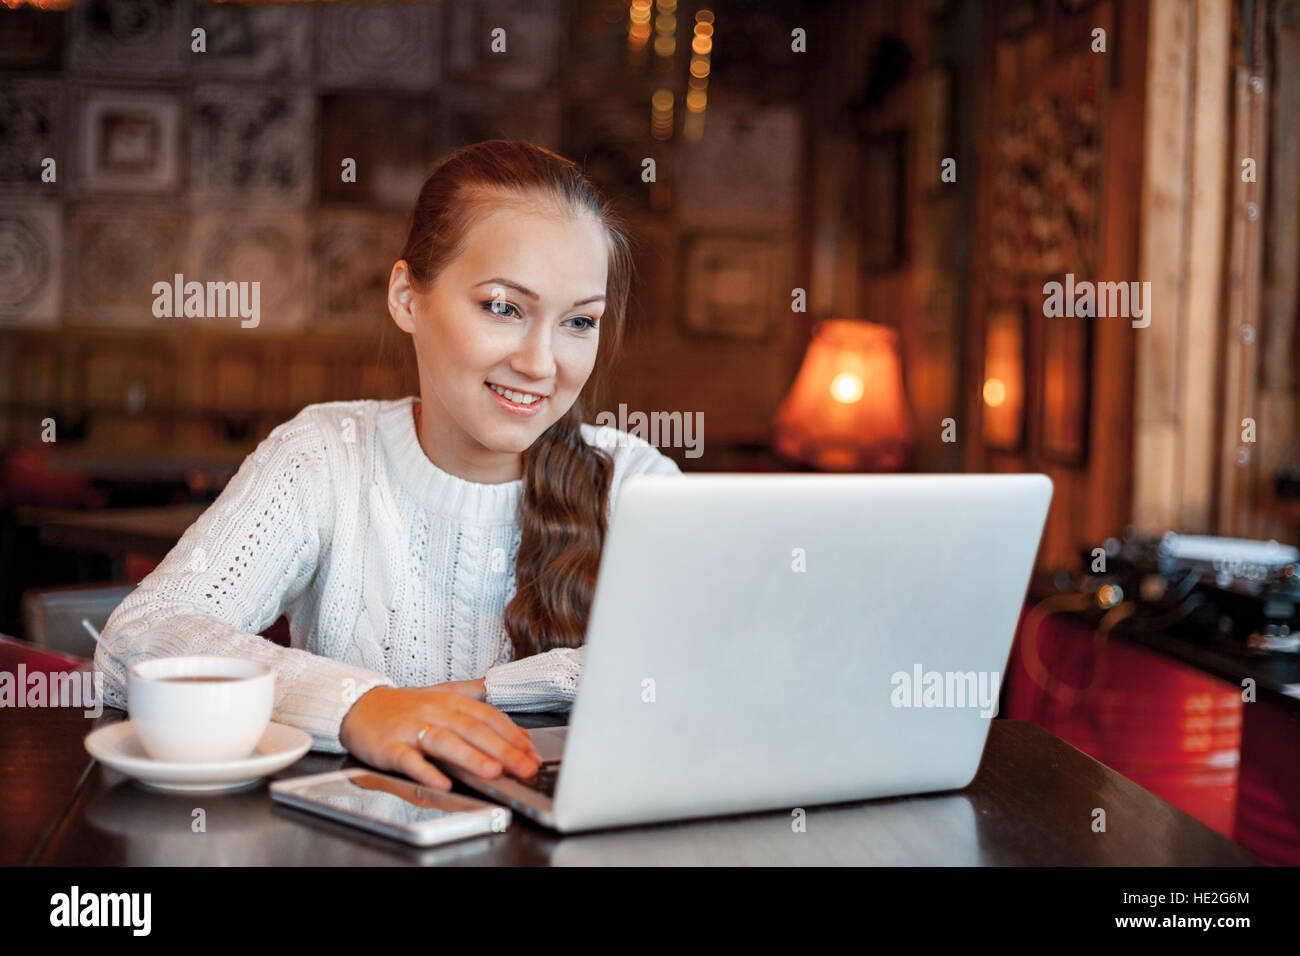 Yong woman a work at laptop in cafe Stock Photo